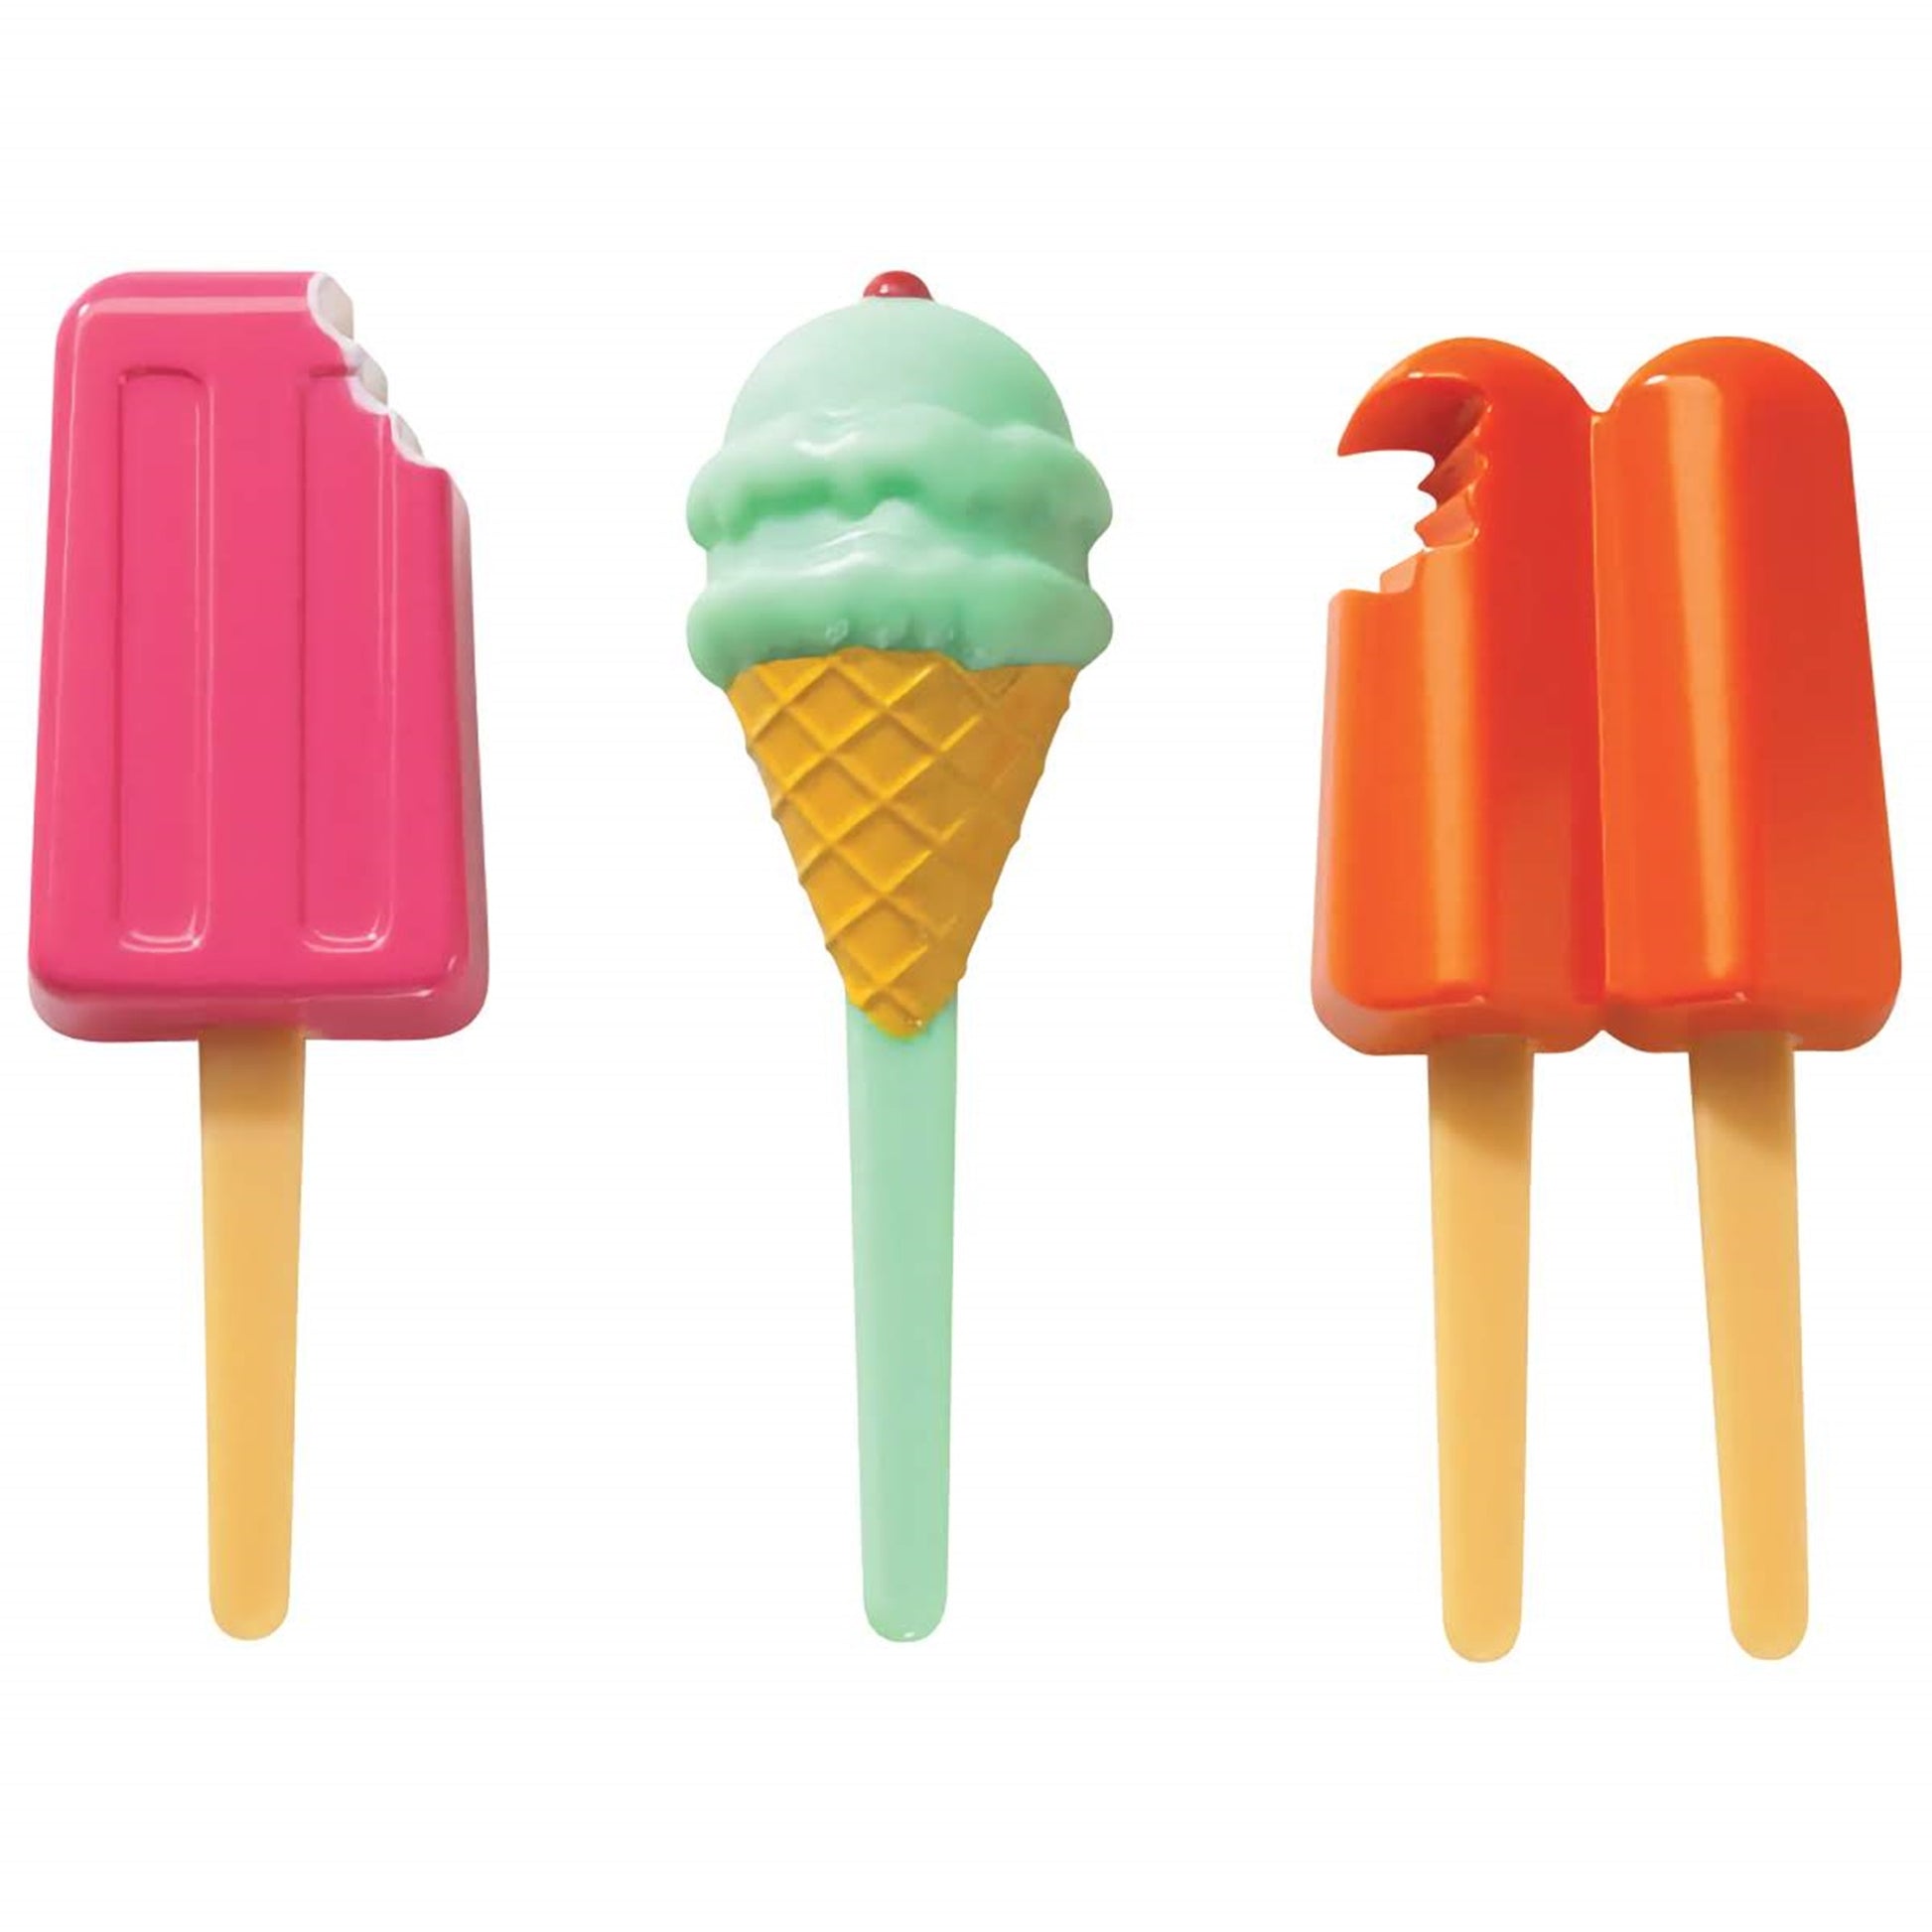 Frozen treats cupcake topper picks shaped like classic summer ice pops and ice cream cones, in bright, playful colors, ideal for a summer party or ice cream social